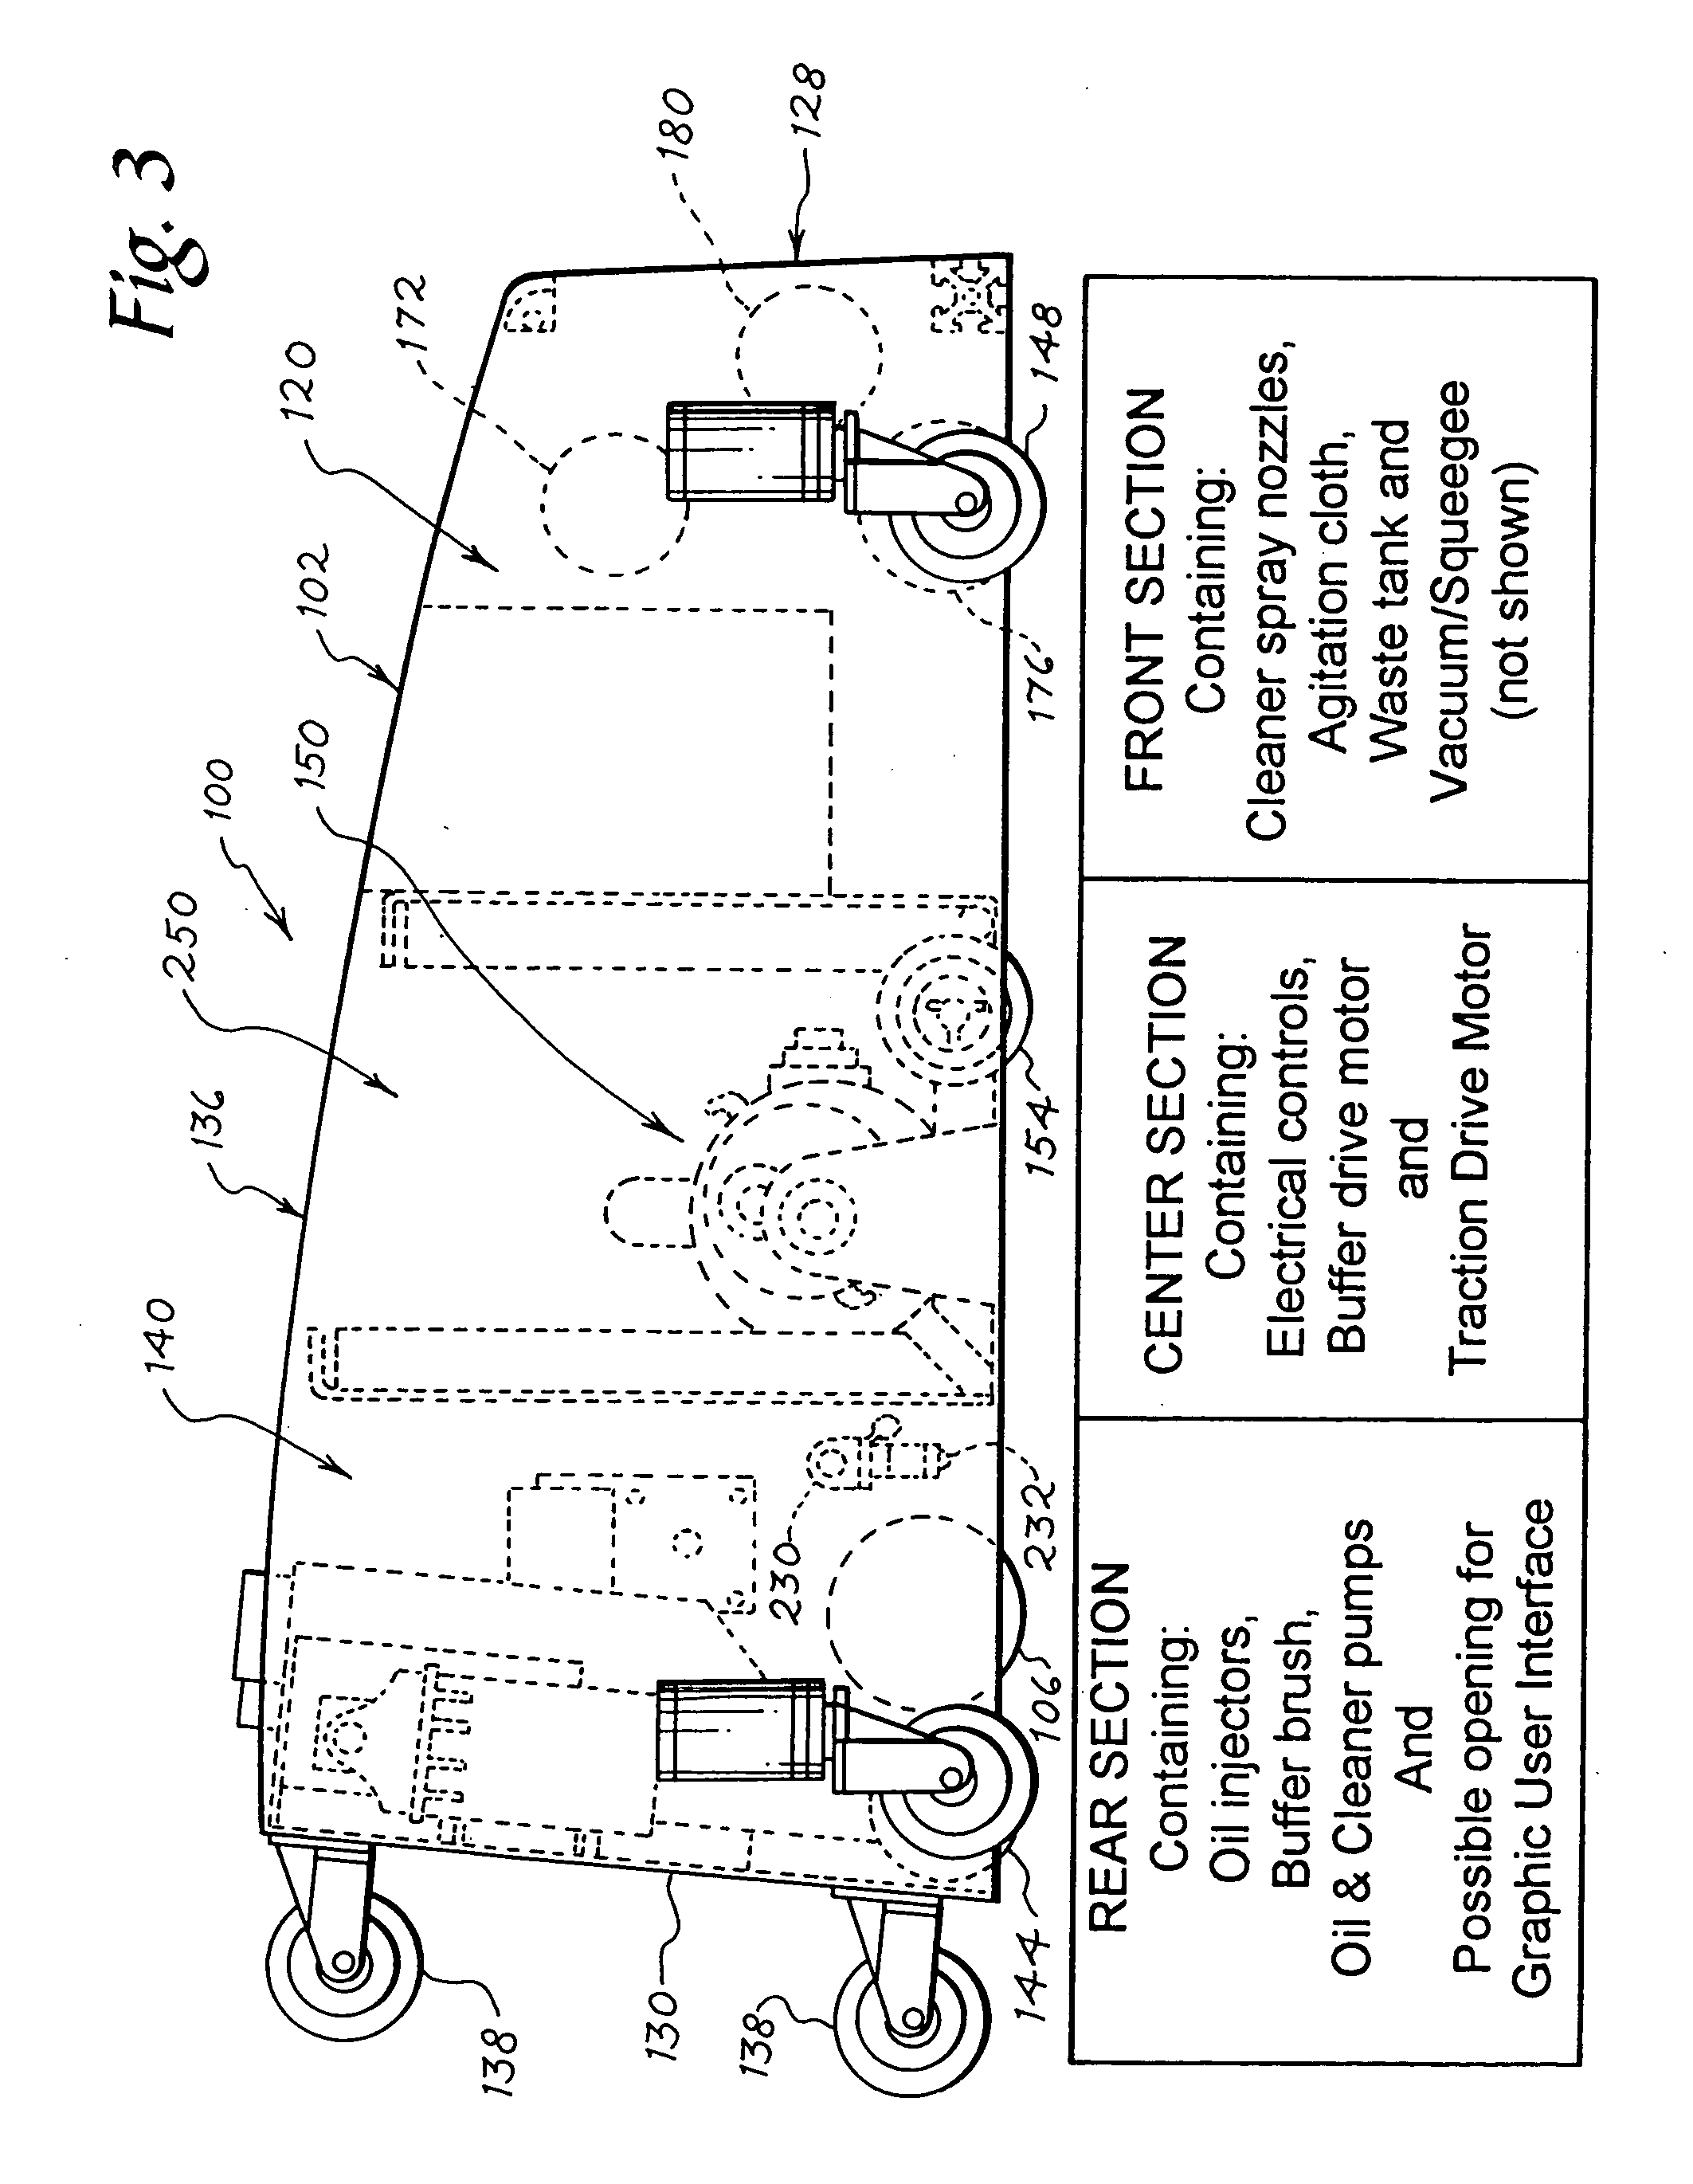 Apparatus and method for conditioning a bowling lane using precision delivery injectors